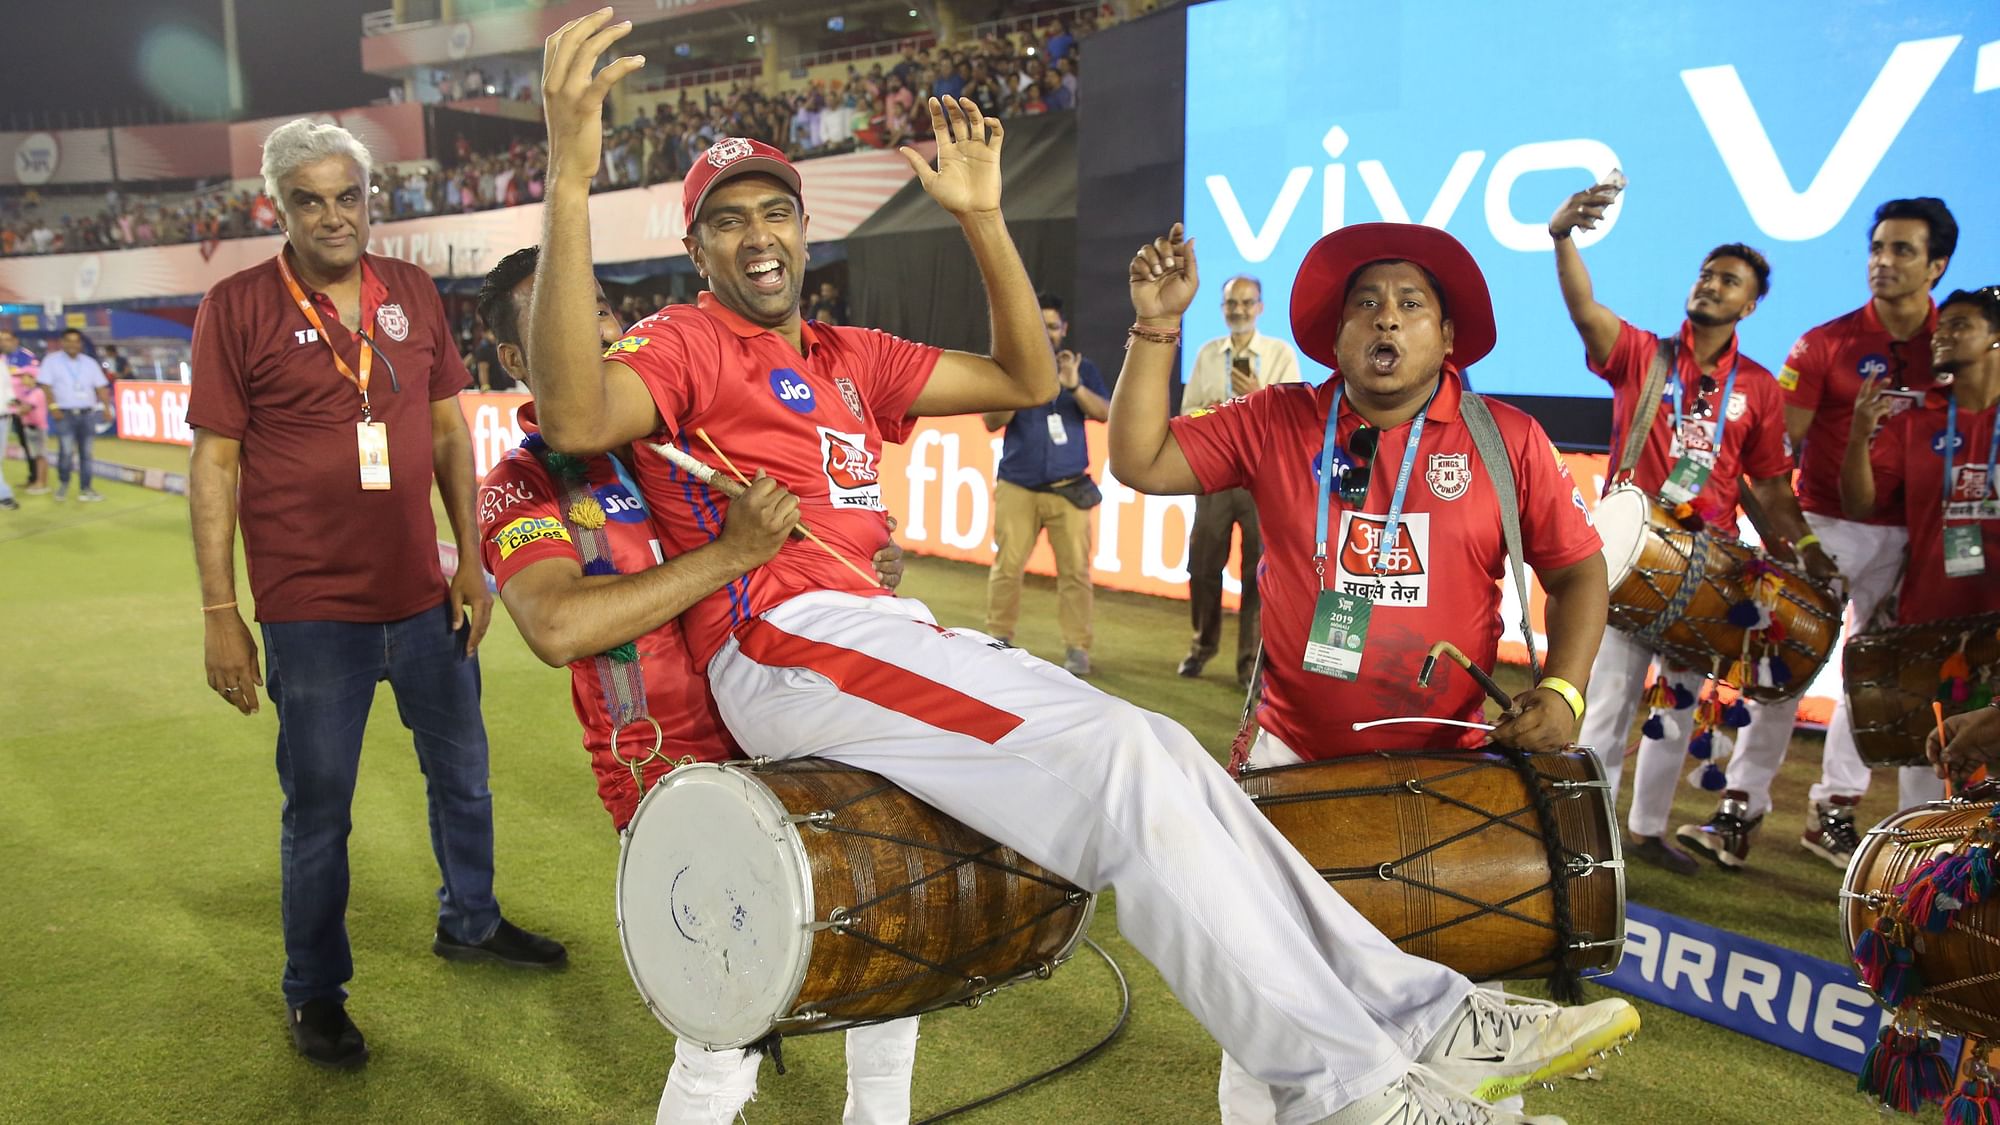 Ravichandran Ashwin captain of Kings XI Punjab celebrates win during match 32 of the Vivo Indian Premier League Season 12, 2019 between the Kings XI Punjab and the Rajasthan Royals held at the IS Bindra Stadium, Mohali on the 16th April 2019